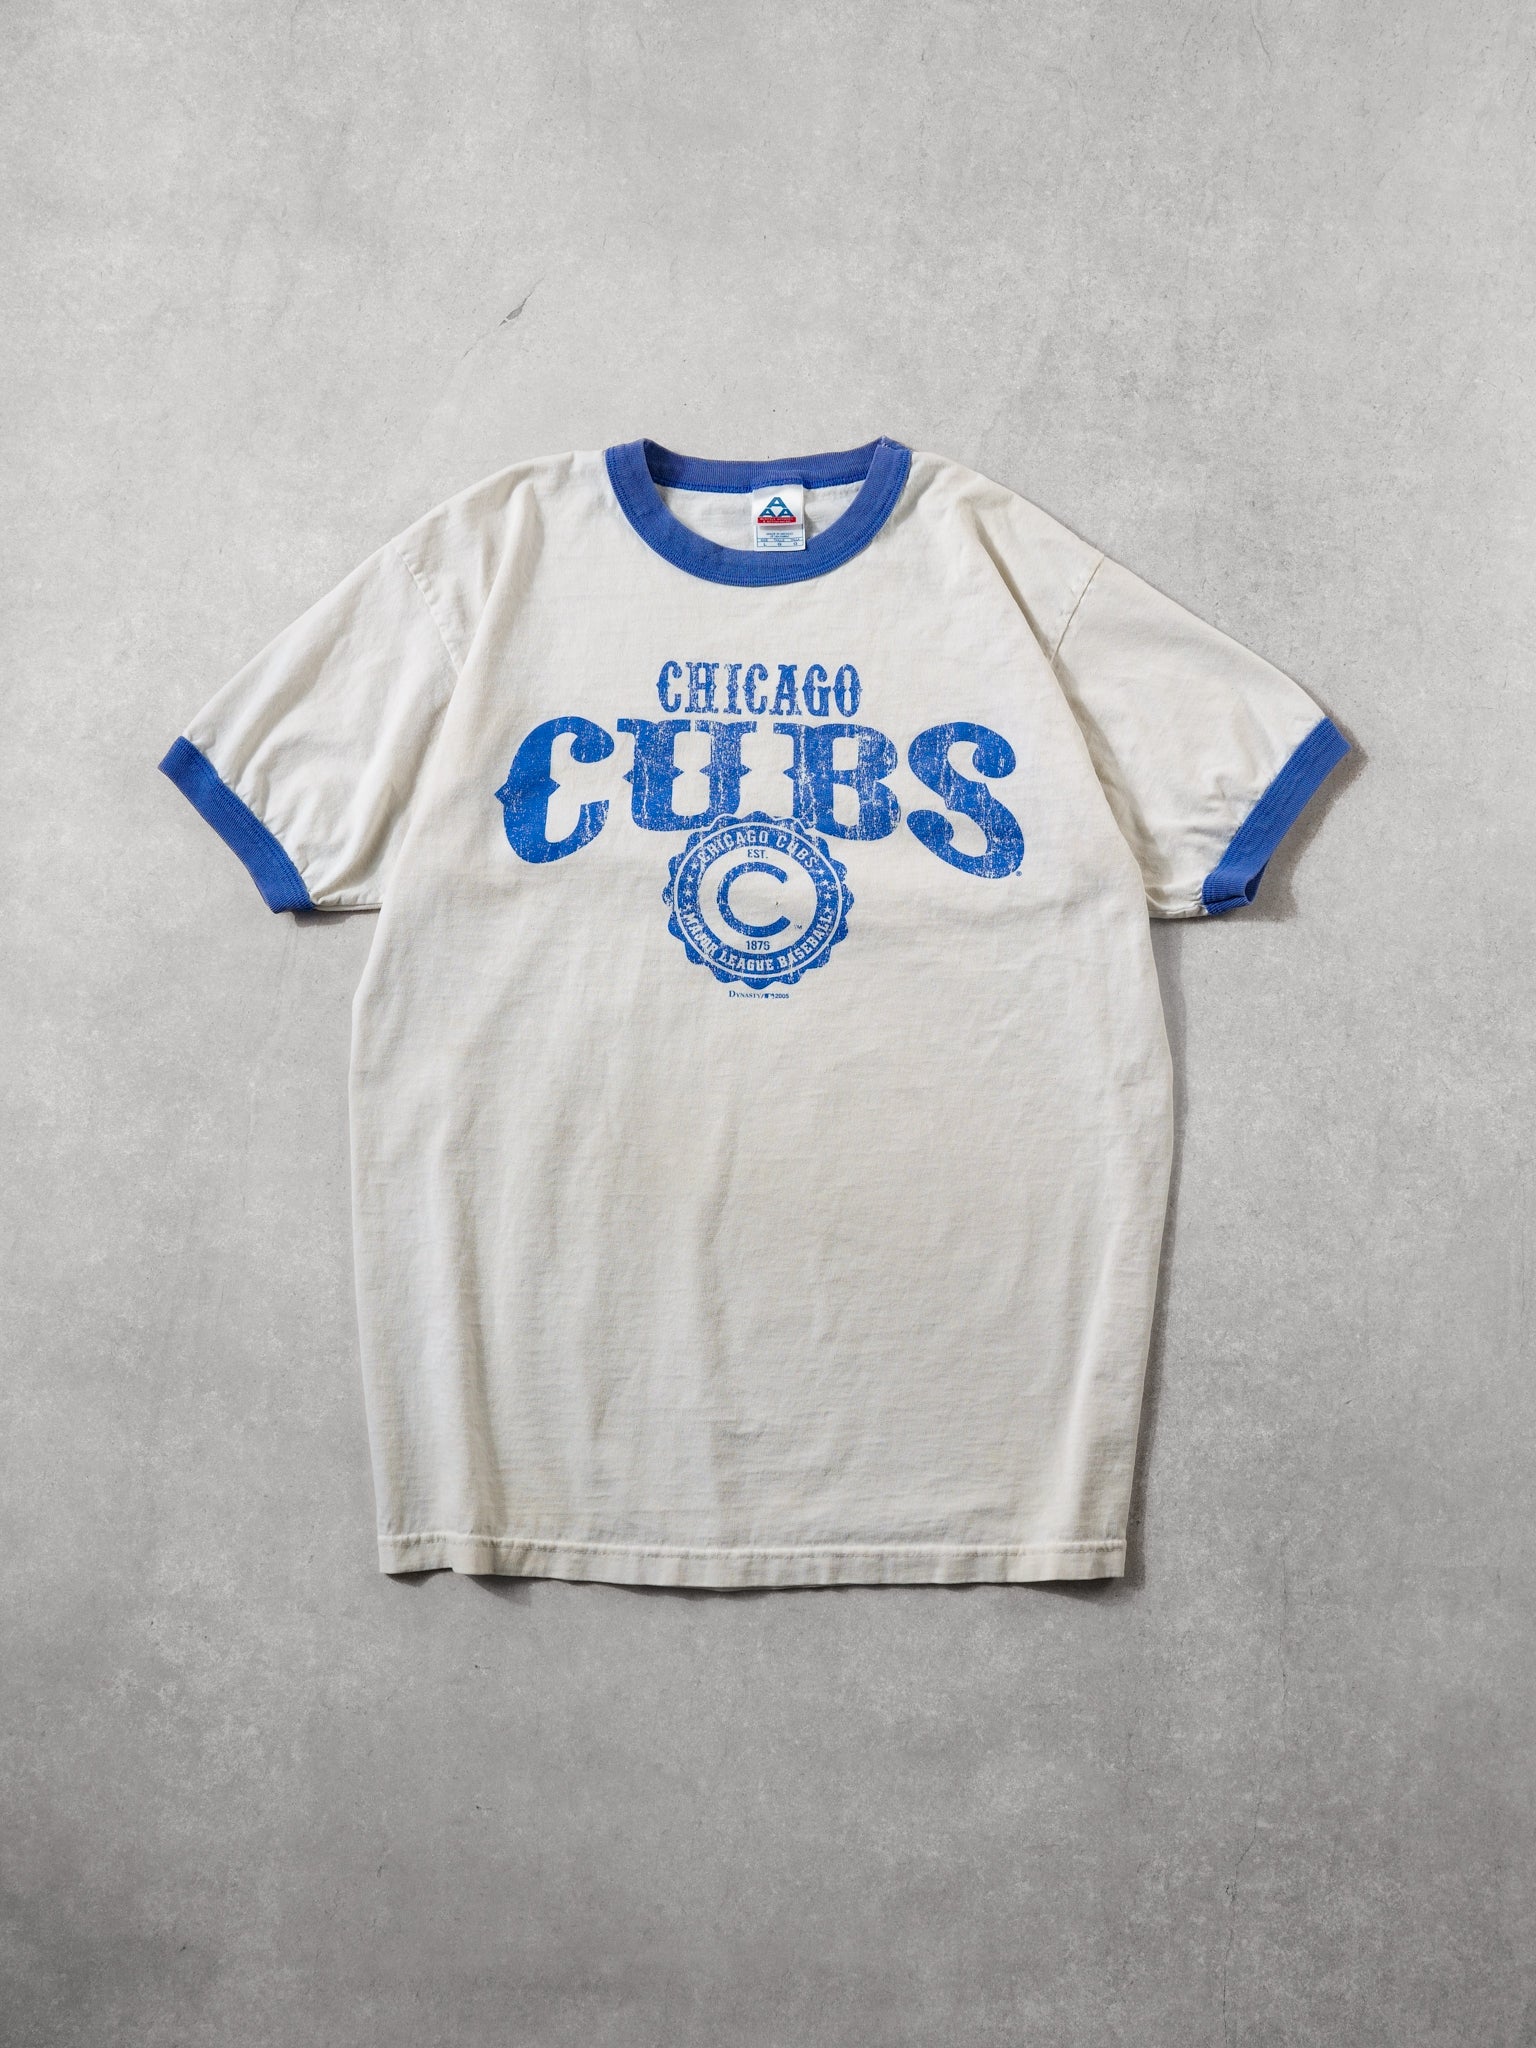 Vintage 05' White And Blue Chicago Cubs Emblem Tee (M)